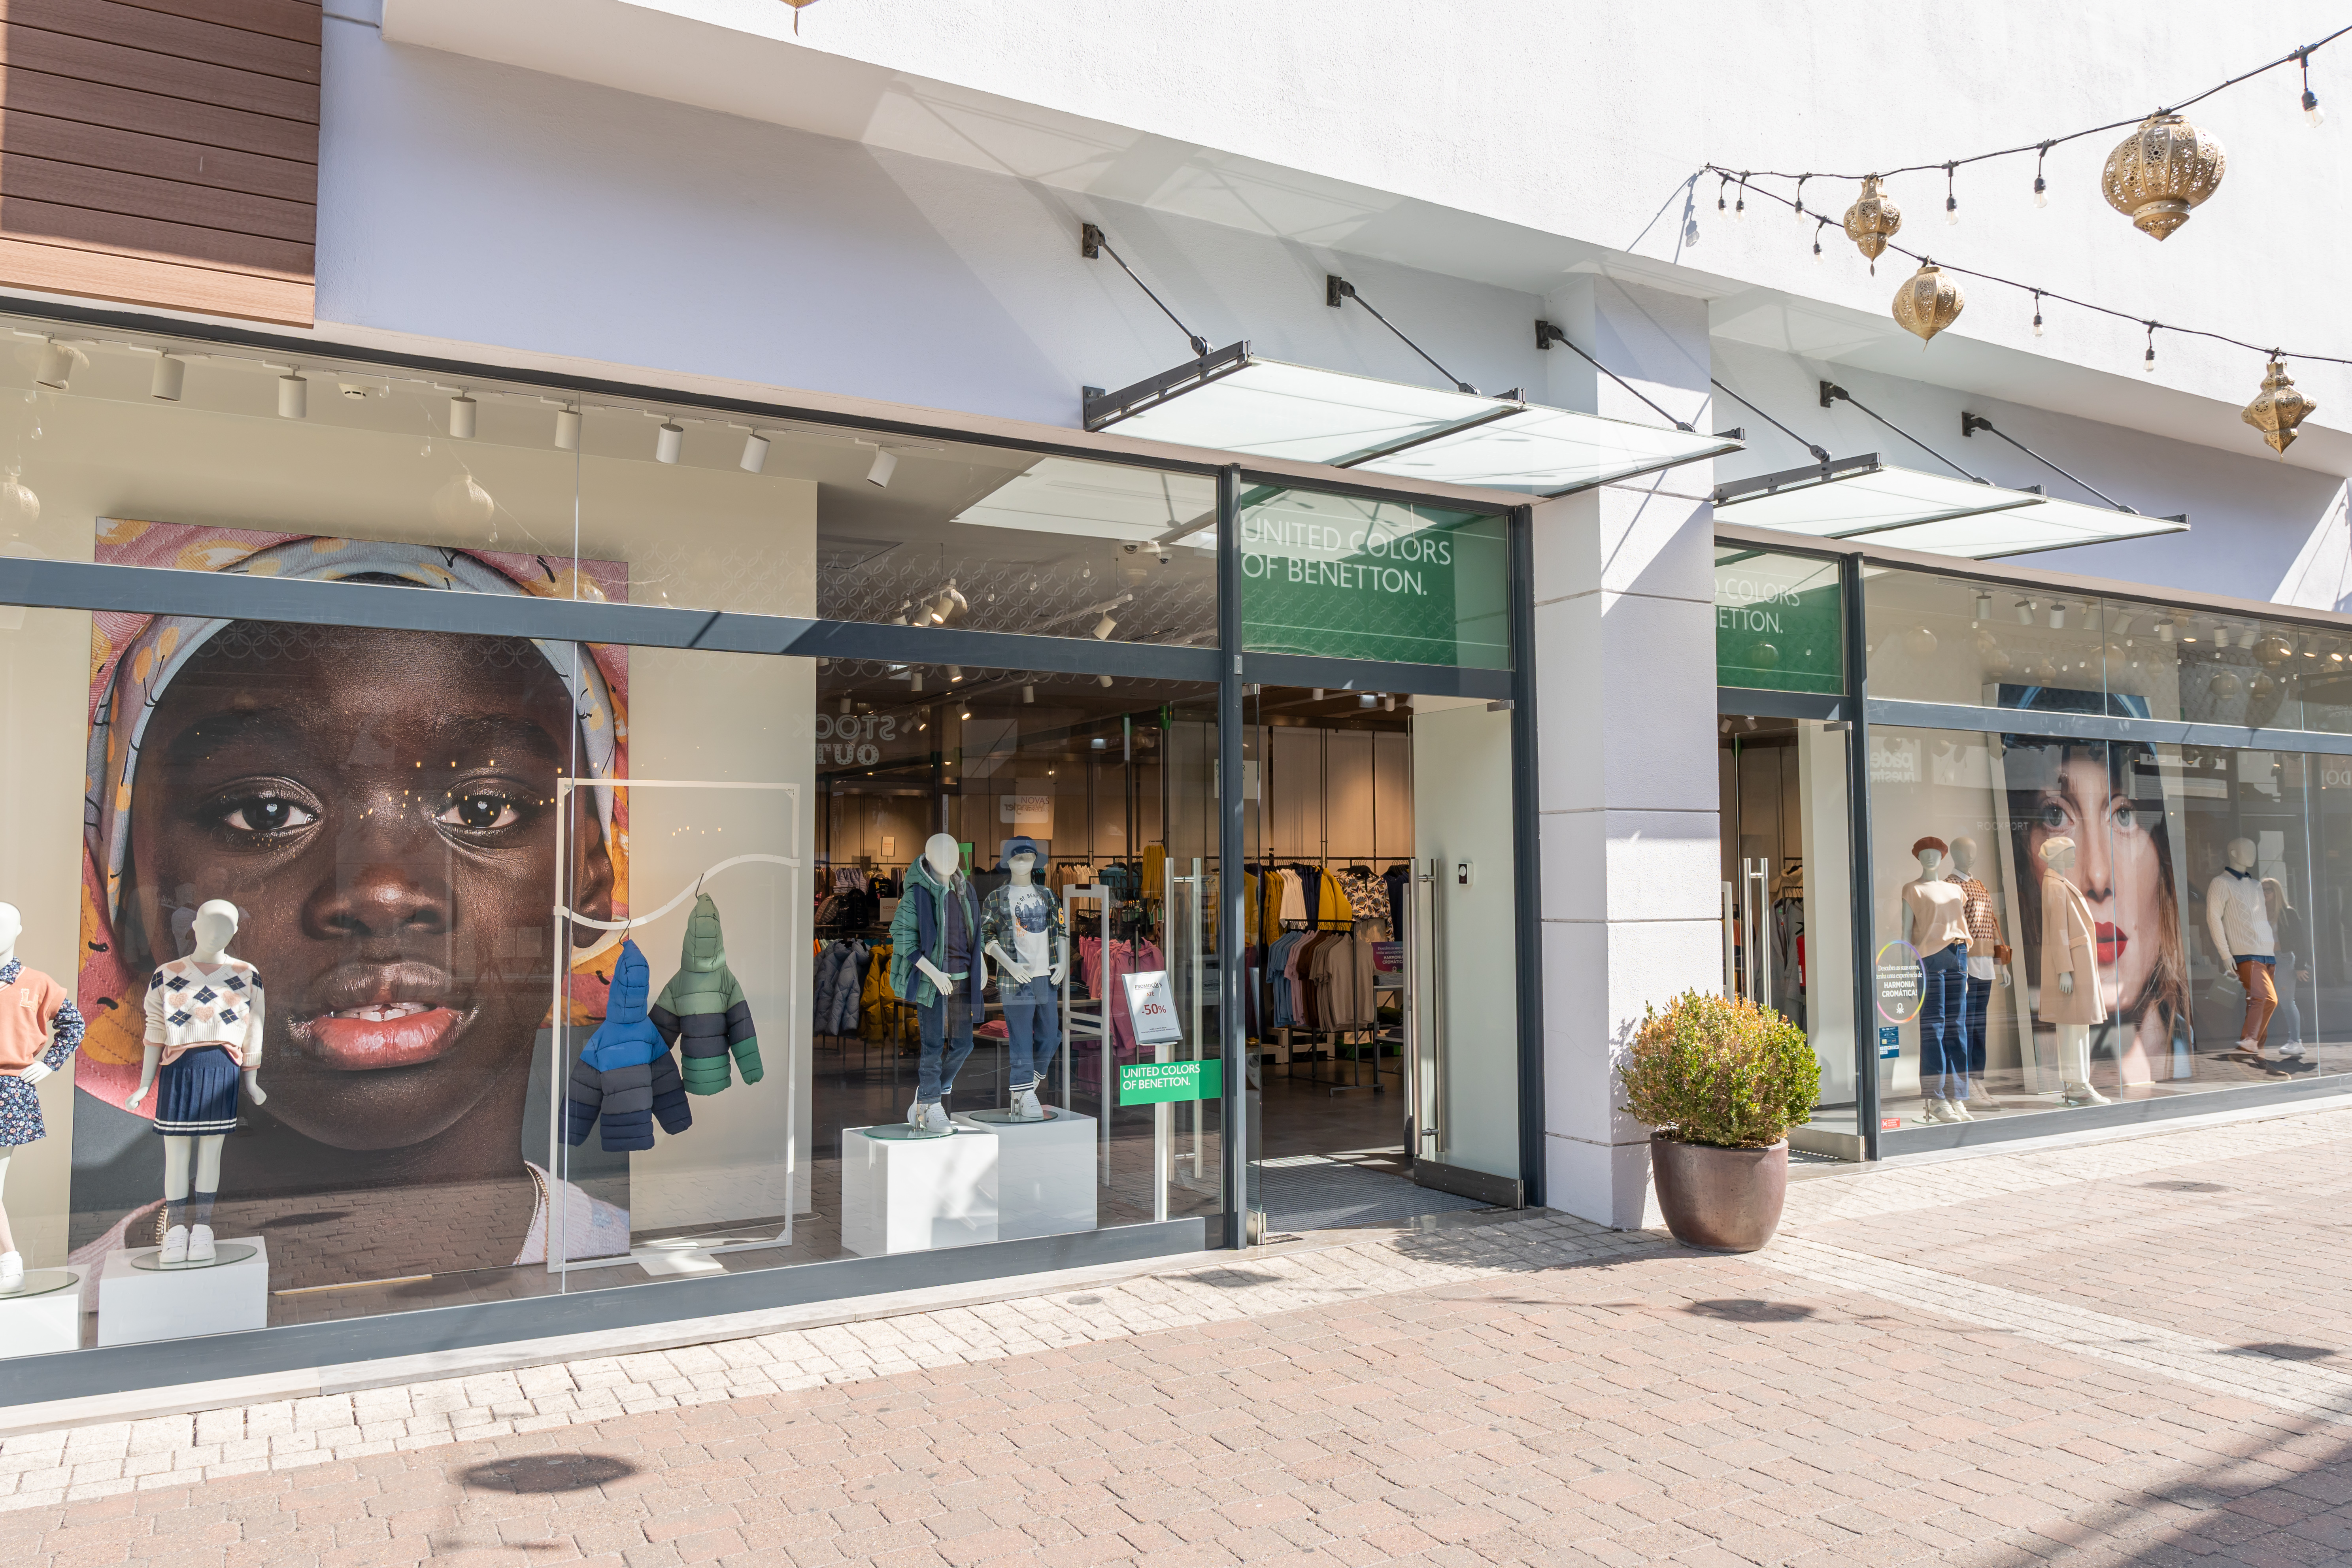 UNDERCOLORS OF BENETTON - Store Apparel and accessories - Valmontone Outlet